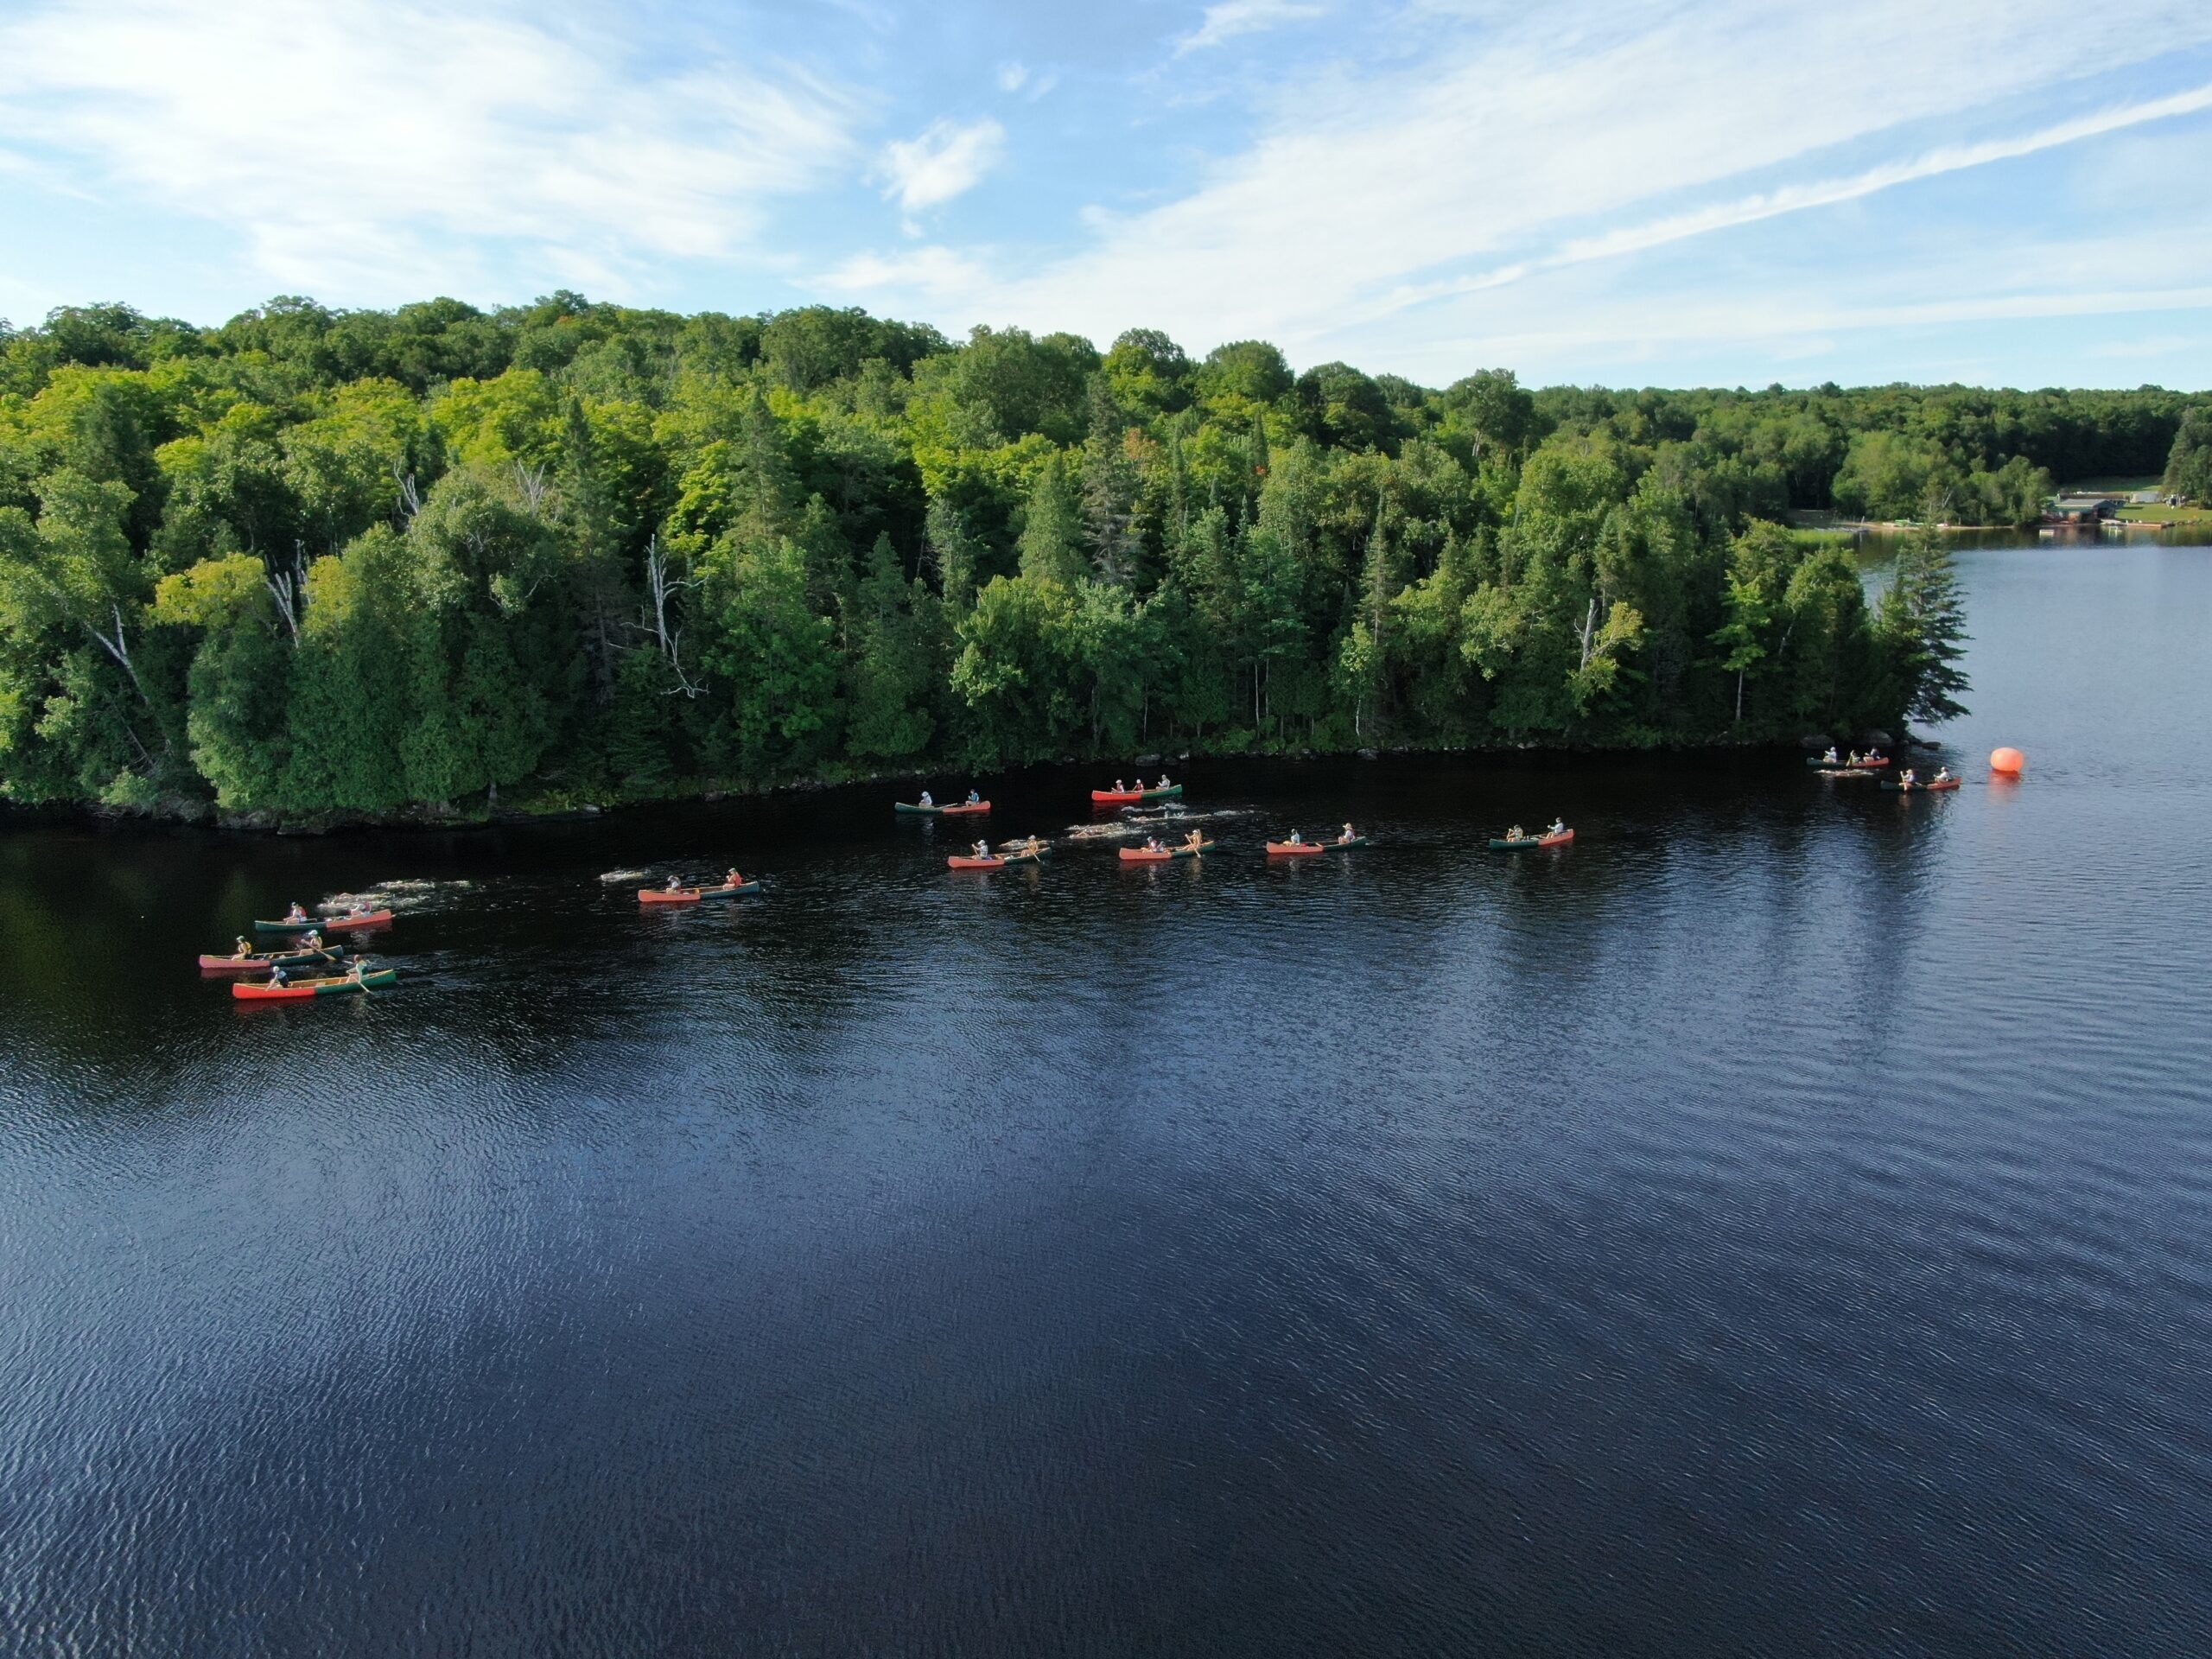 Areal view, green and orange canoes